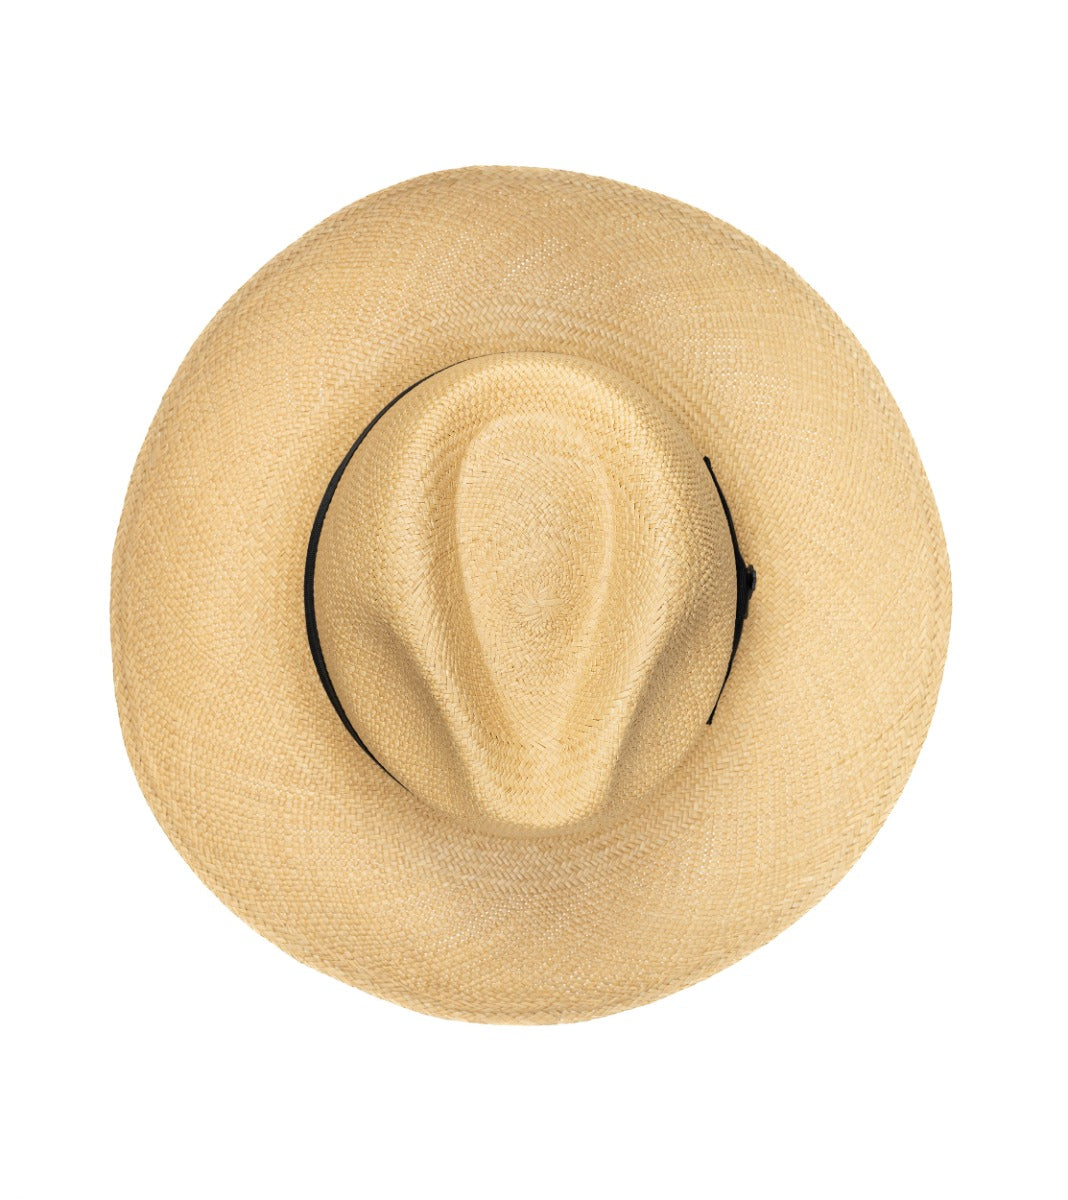 Jessica Wide Brim Panama Hat with Navy Band - Natural